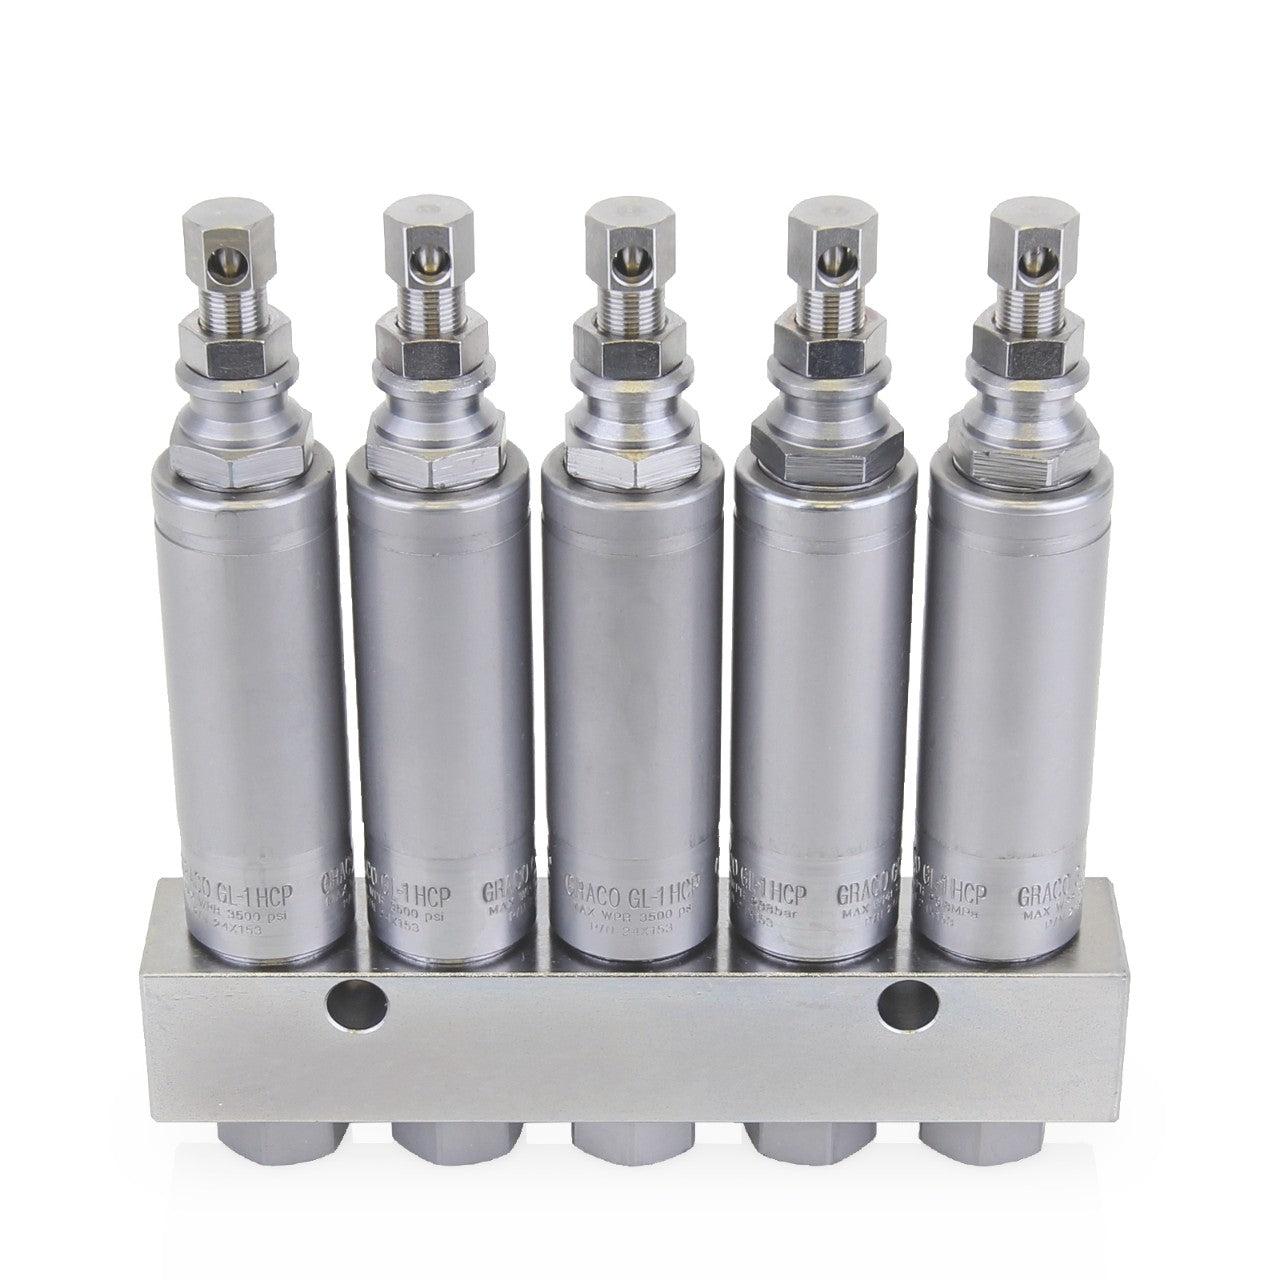 GL-1™ HCP (High Corrosion Protection) Grease Injector, Five Point